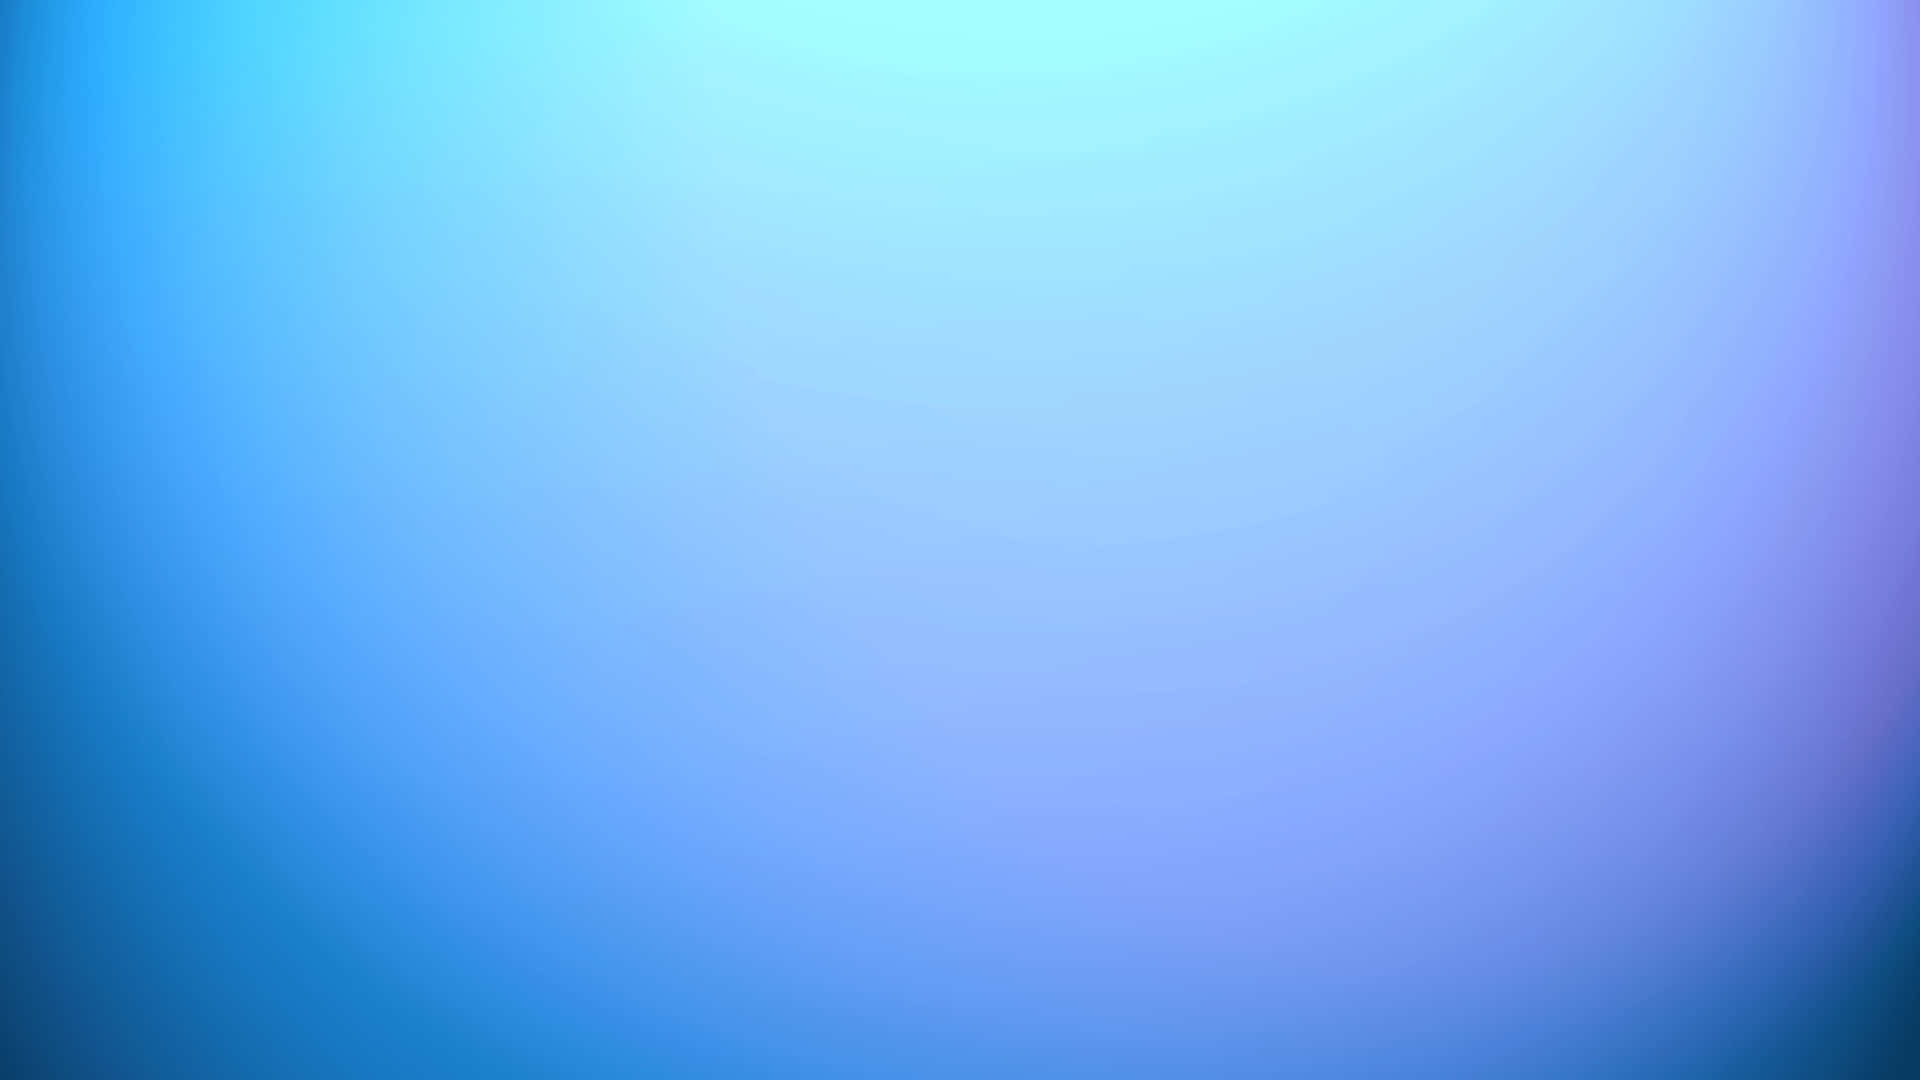 Great Royal Blue Gradient Background